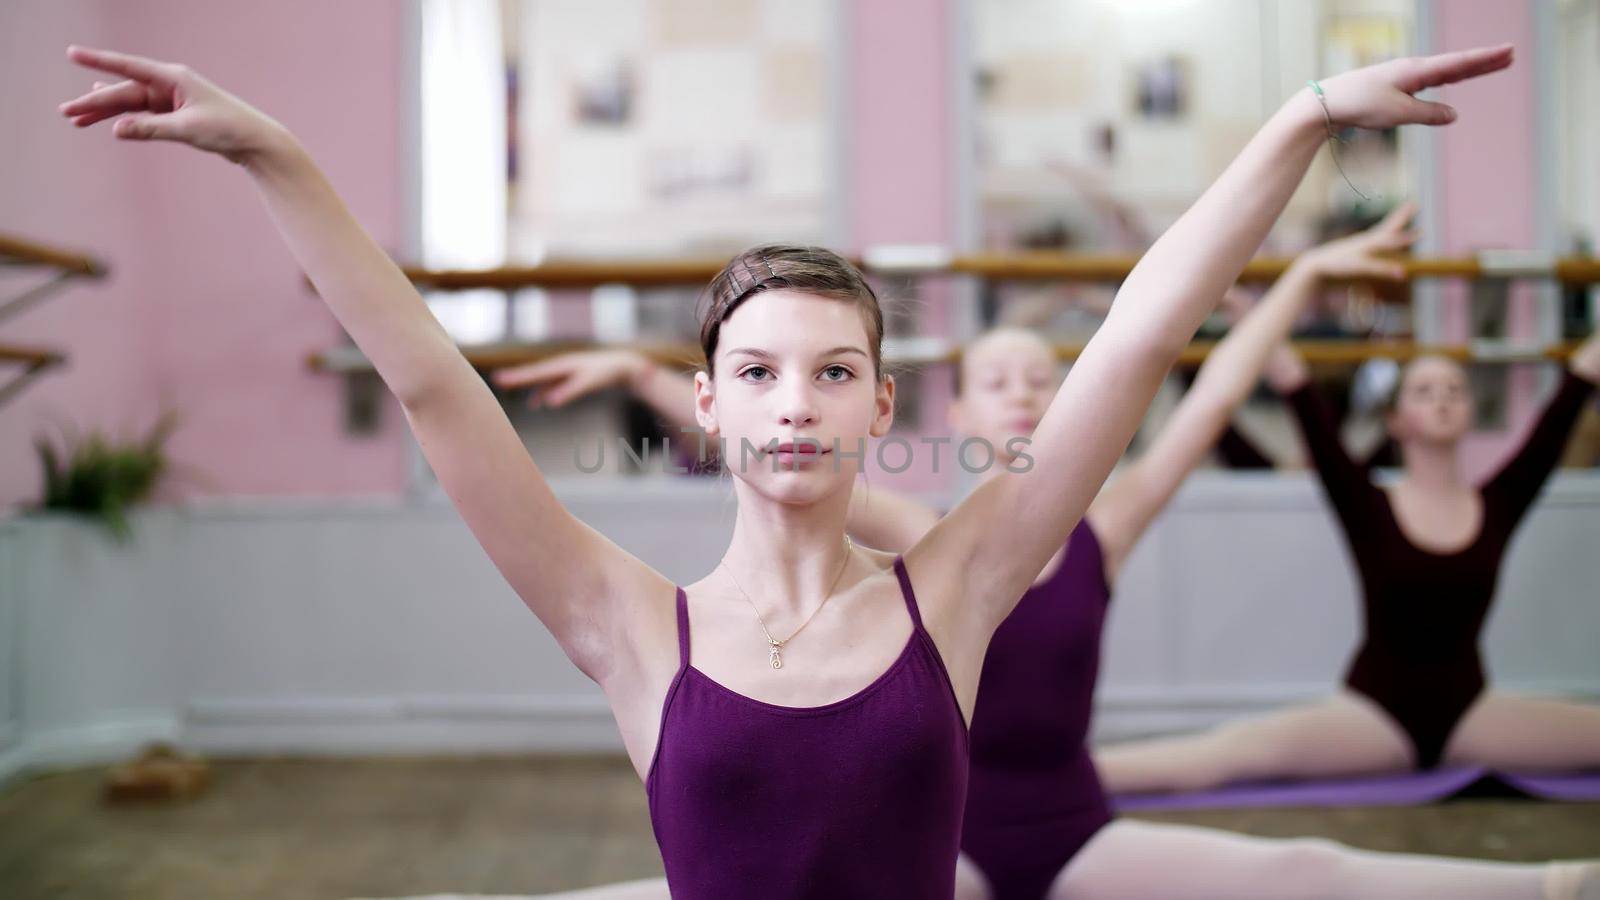 in dancing hall, Young ballerina in purple leotards performs part de bras In 3 position with forward tilt, girl is sitting on twine, moving hands elegantly , close-up by djtreneryay